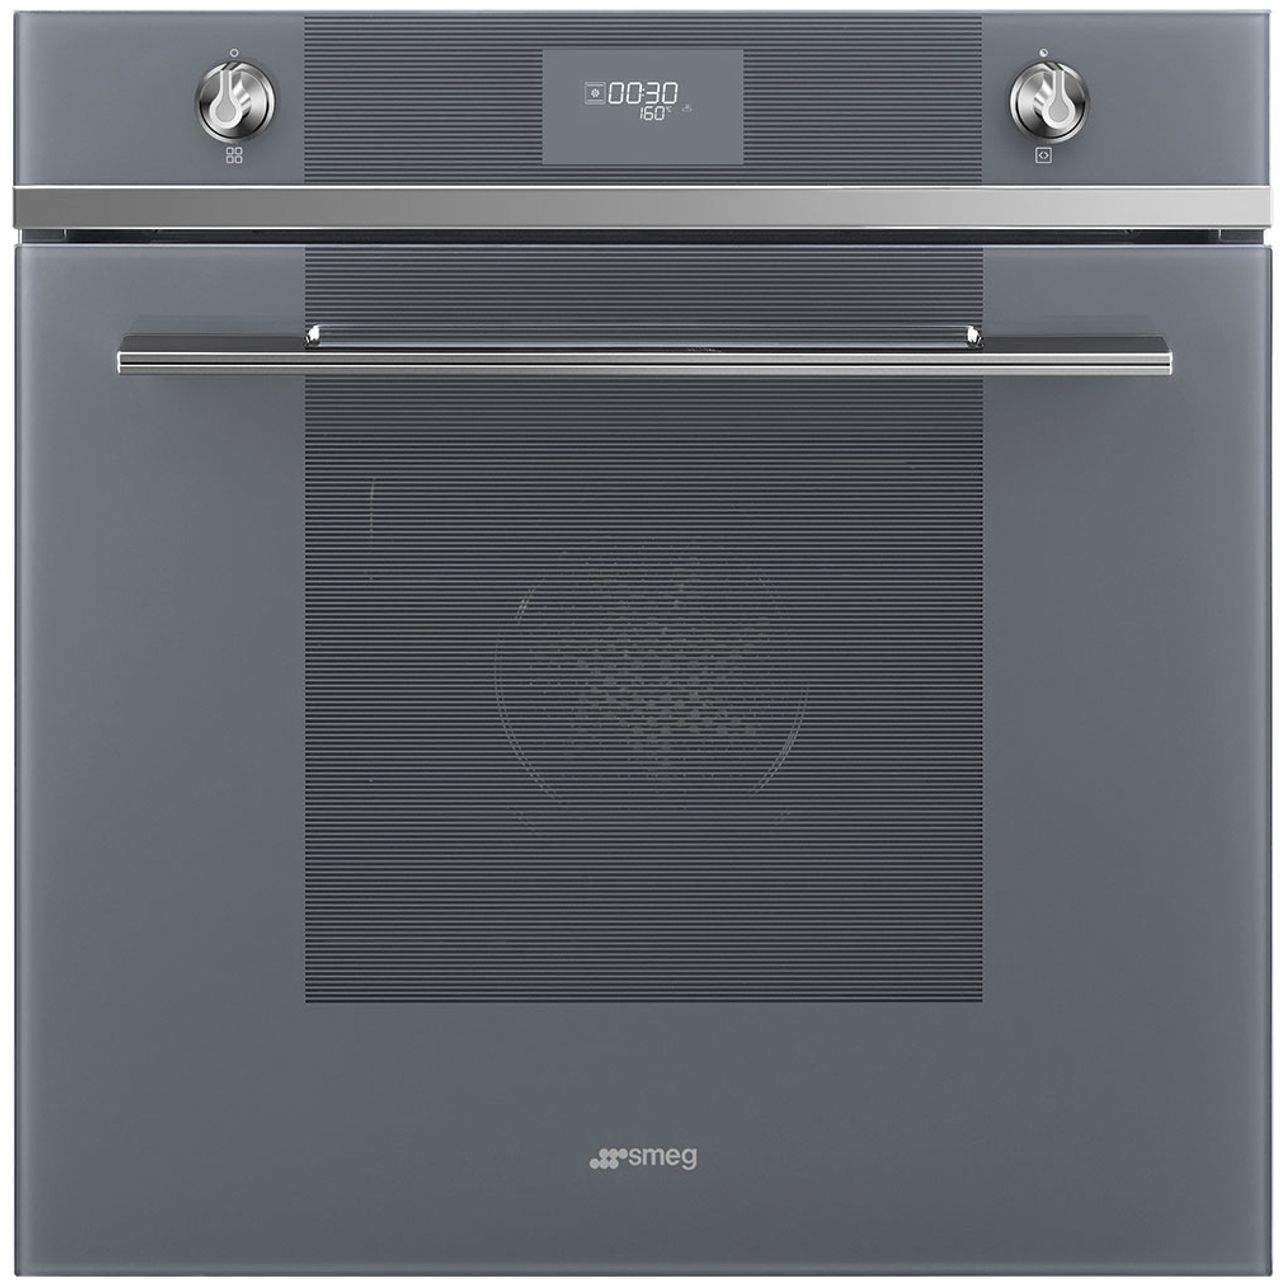 Smeg Linea SF6101TVS1 Built In Electric Single Oven Review